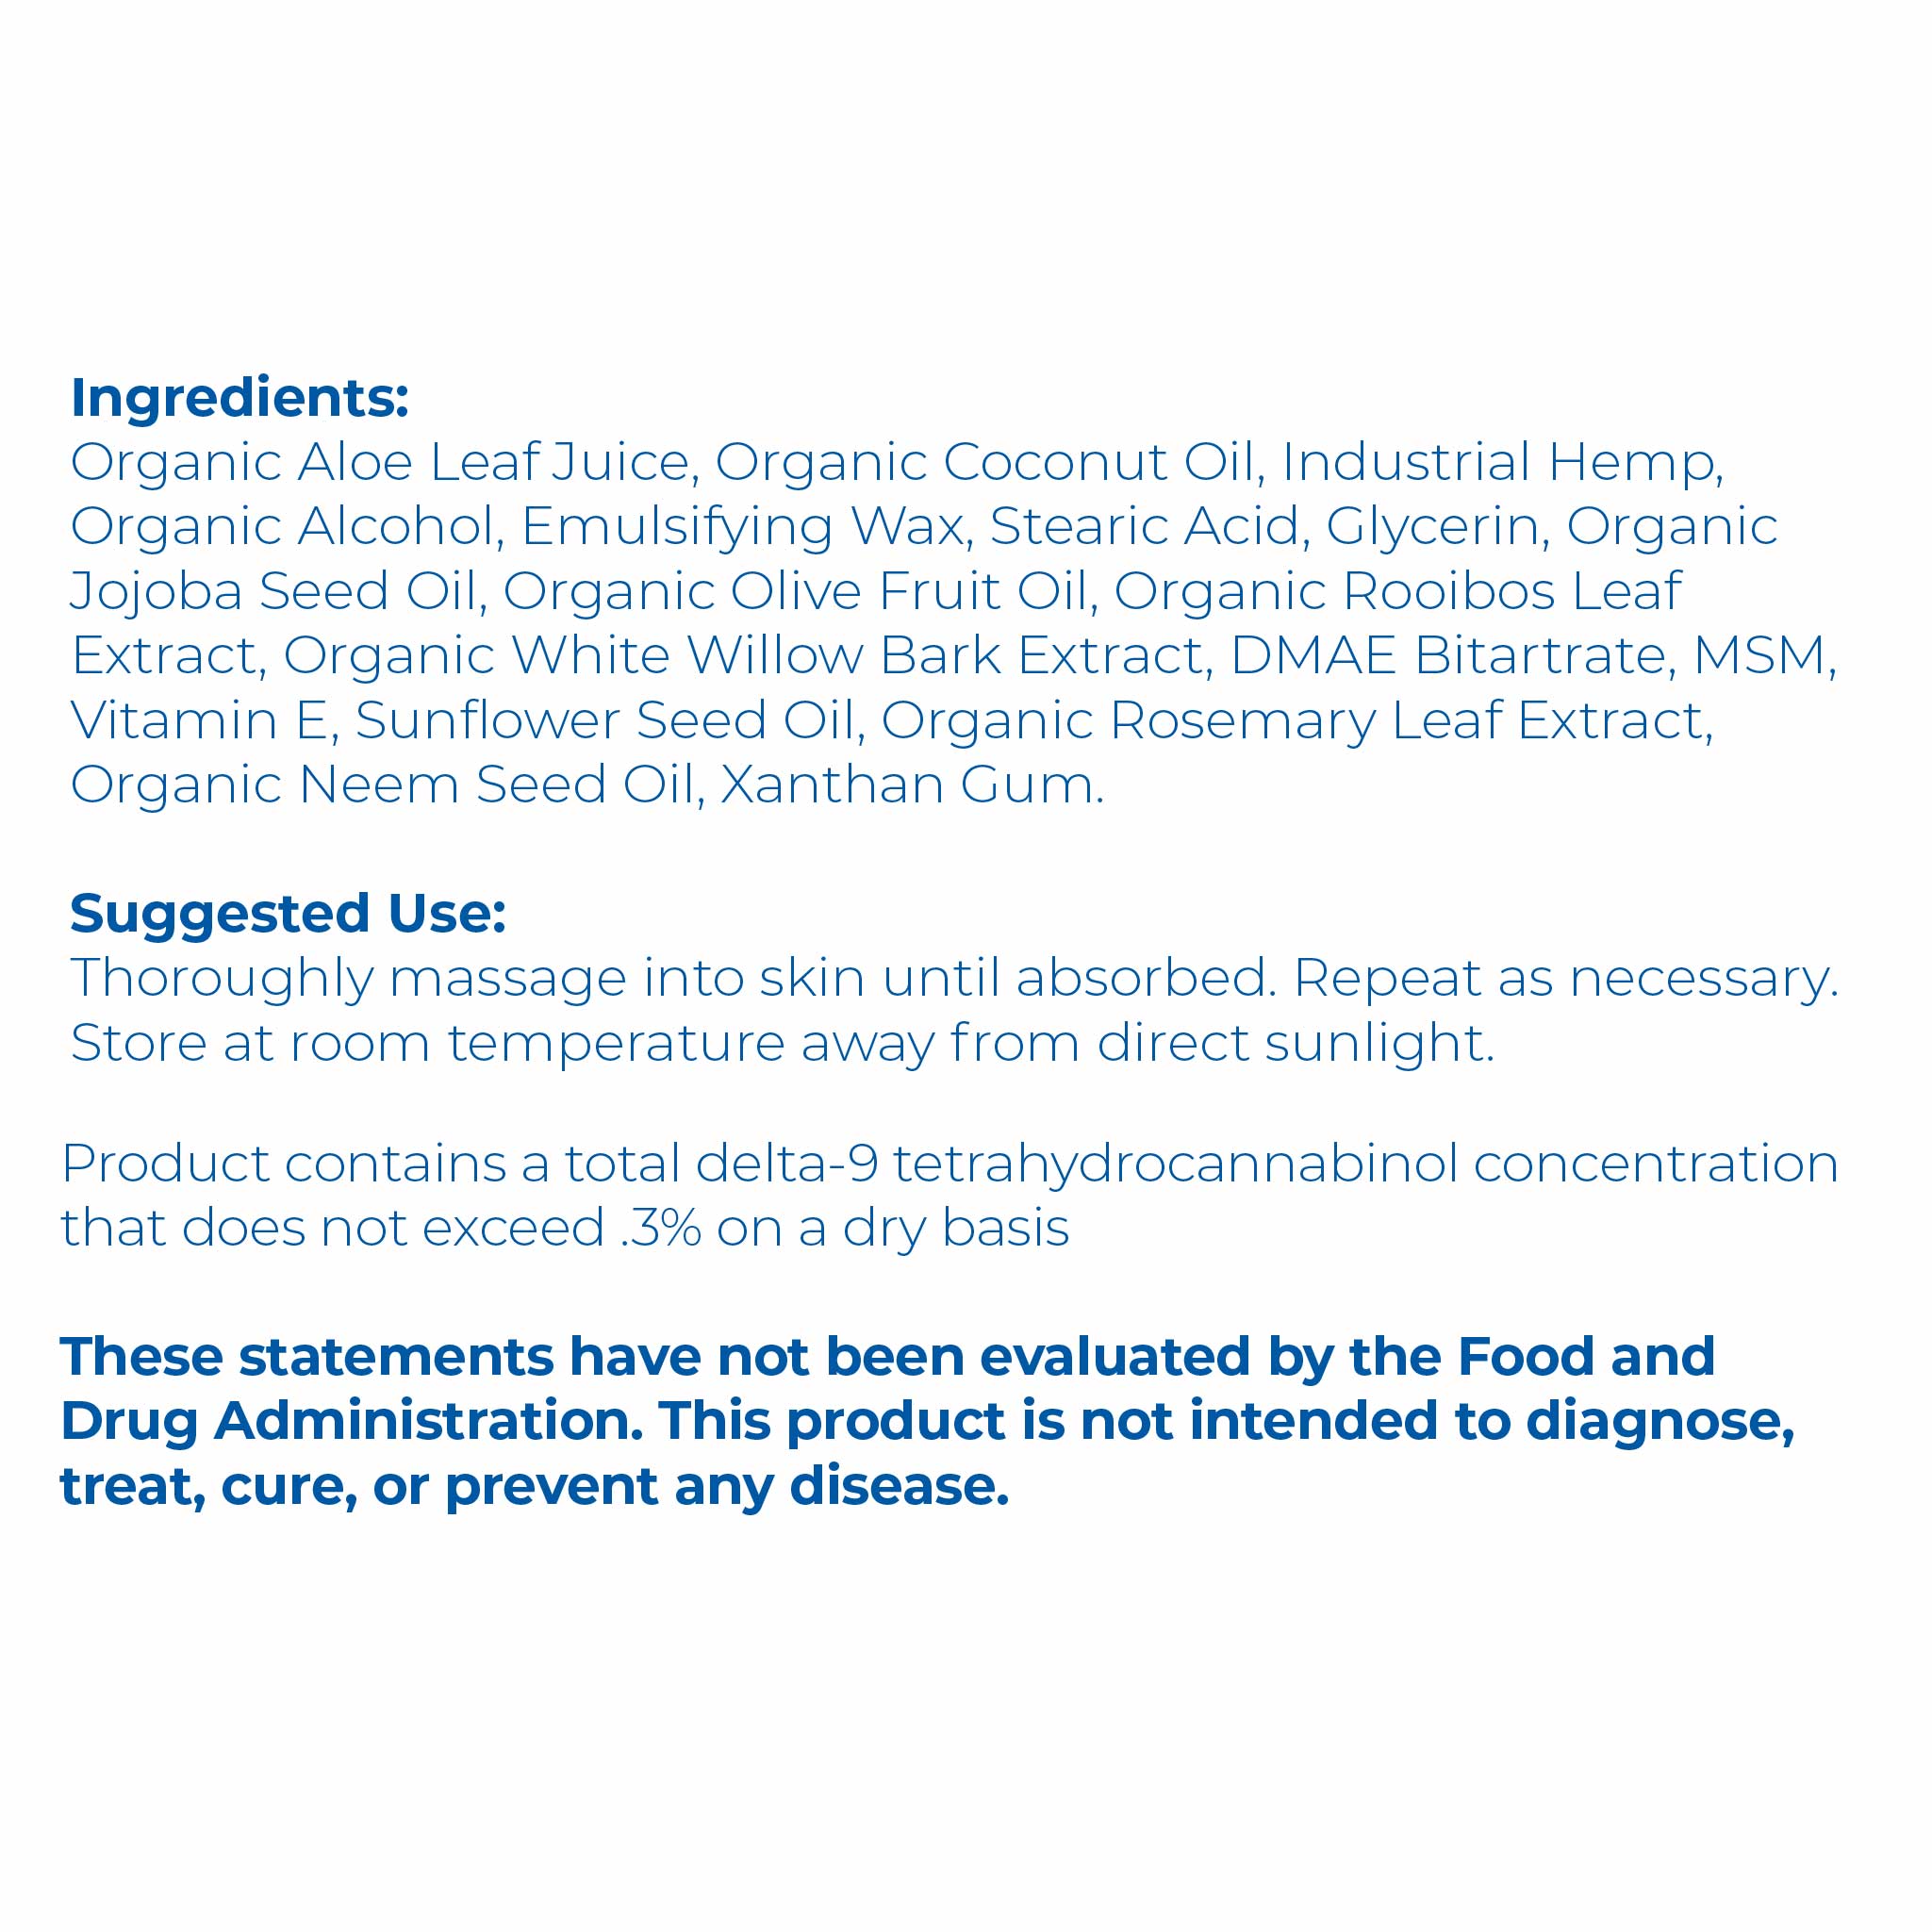 Ingredients list label closeup of Proleve 500mg CBD Hand & Body Lotion Bottle